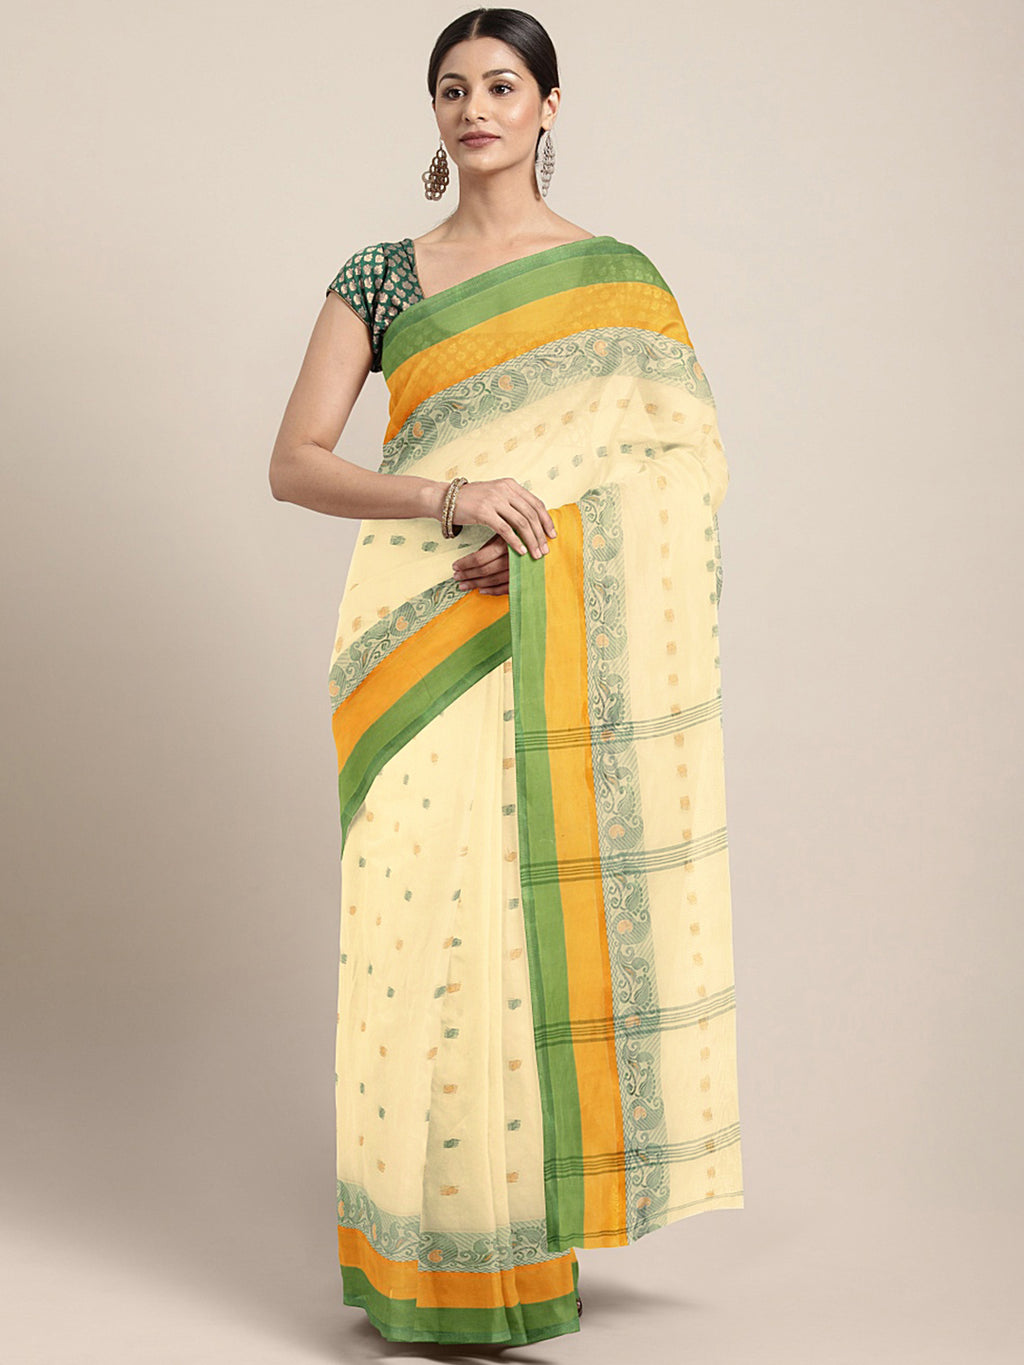 Cream Tant Woven Design Saree Without Blouse Piece DUTASA051 DUTASA051-Saree-Kalakari India-DUTASA051-Geographical Indication, Hand Crafted, Heritage Prints, Natural Dyes, Sarees, Silk Cotton, Sustainable Fabrics, Taant, Tant, West Bengal, Woven-[Linen,Ethnic,wear,Fashionista,Handloom,Handicraft,Indigo,blockprint,block,print,Cotton,Chanderi,Blue, latest,classy,party,bollywood,trendy,summer,style,traditional,formal,elegant,unique,style,hand,block,print, dabu,booti,gift,present,glamorous,affordabl